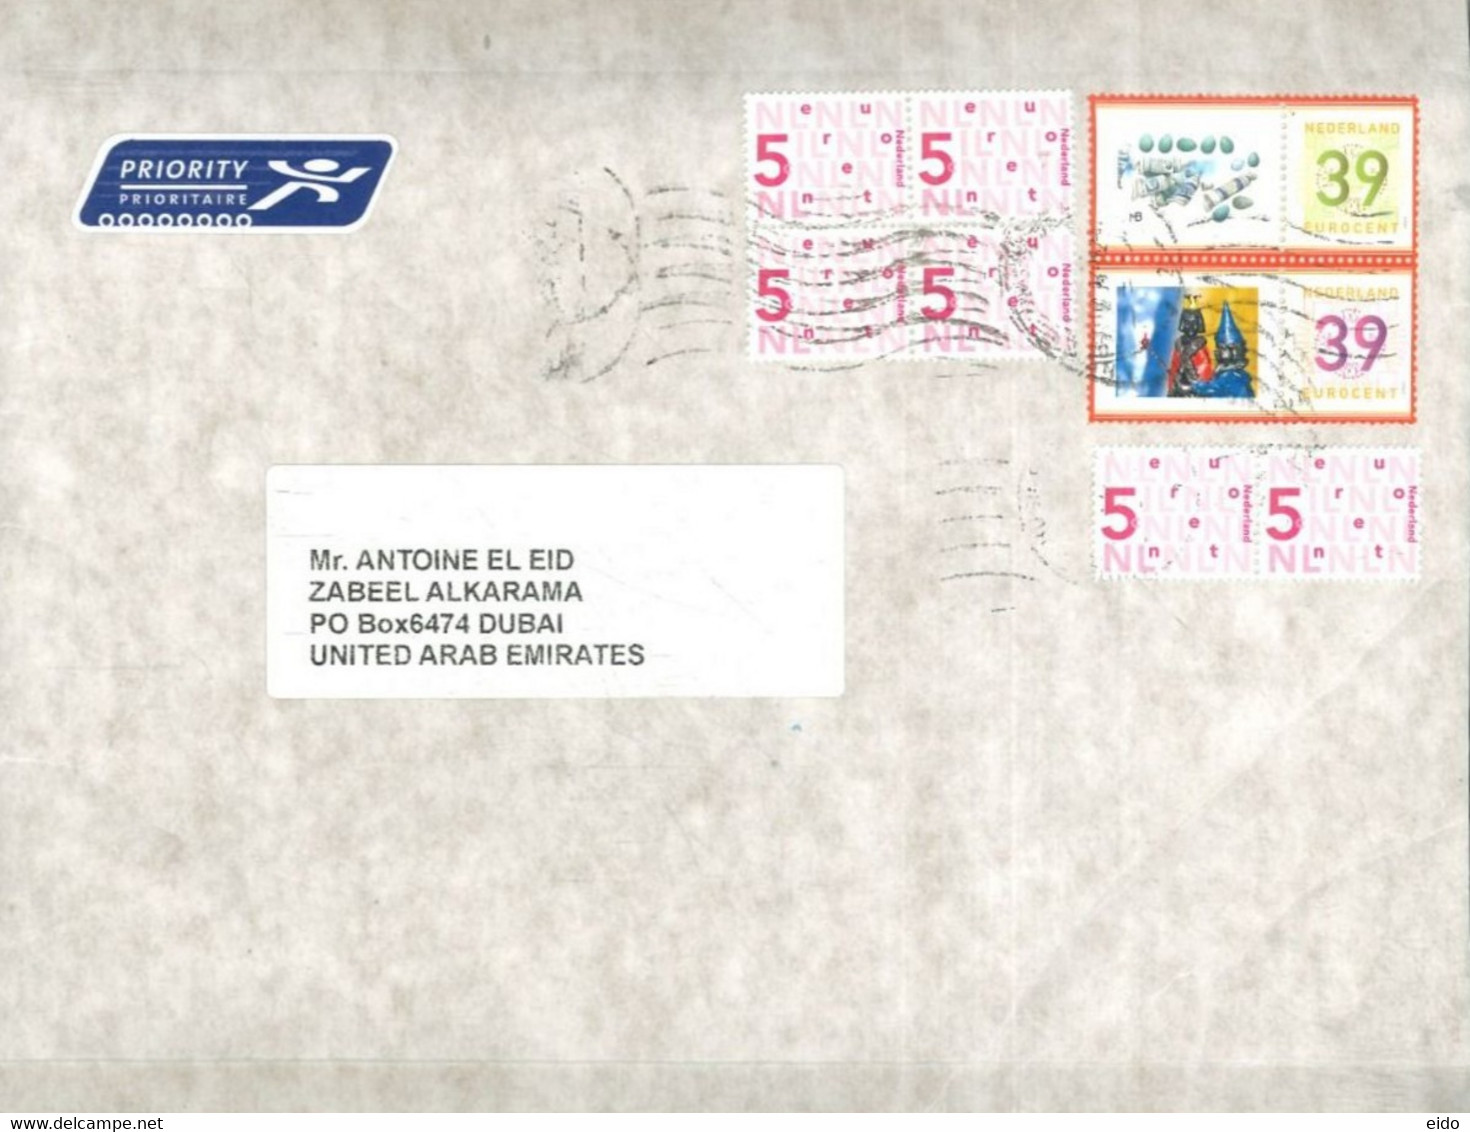 NETHERLANDS  - 2013 - STAMPS  COVER SENT TO DUBAI. - Covers & Documents